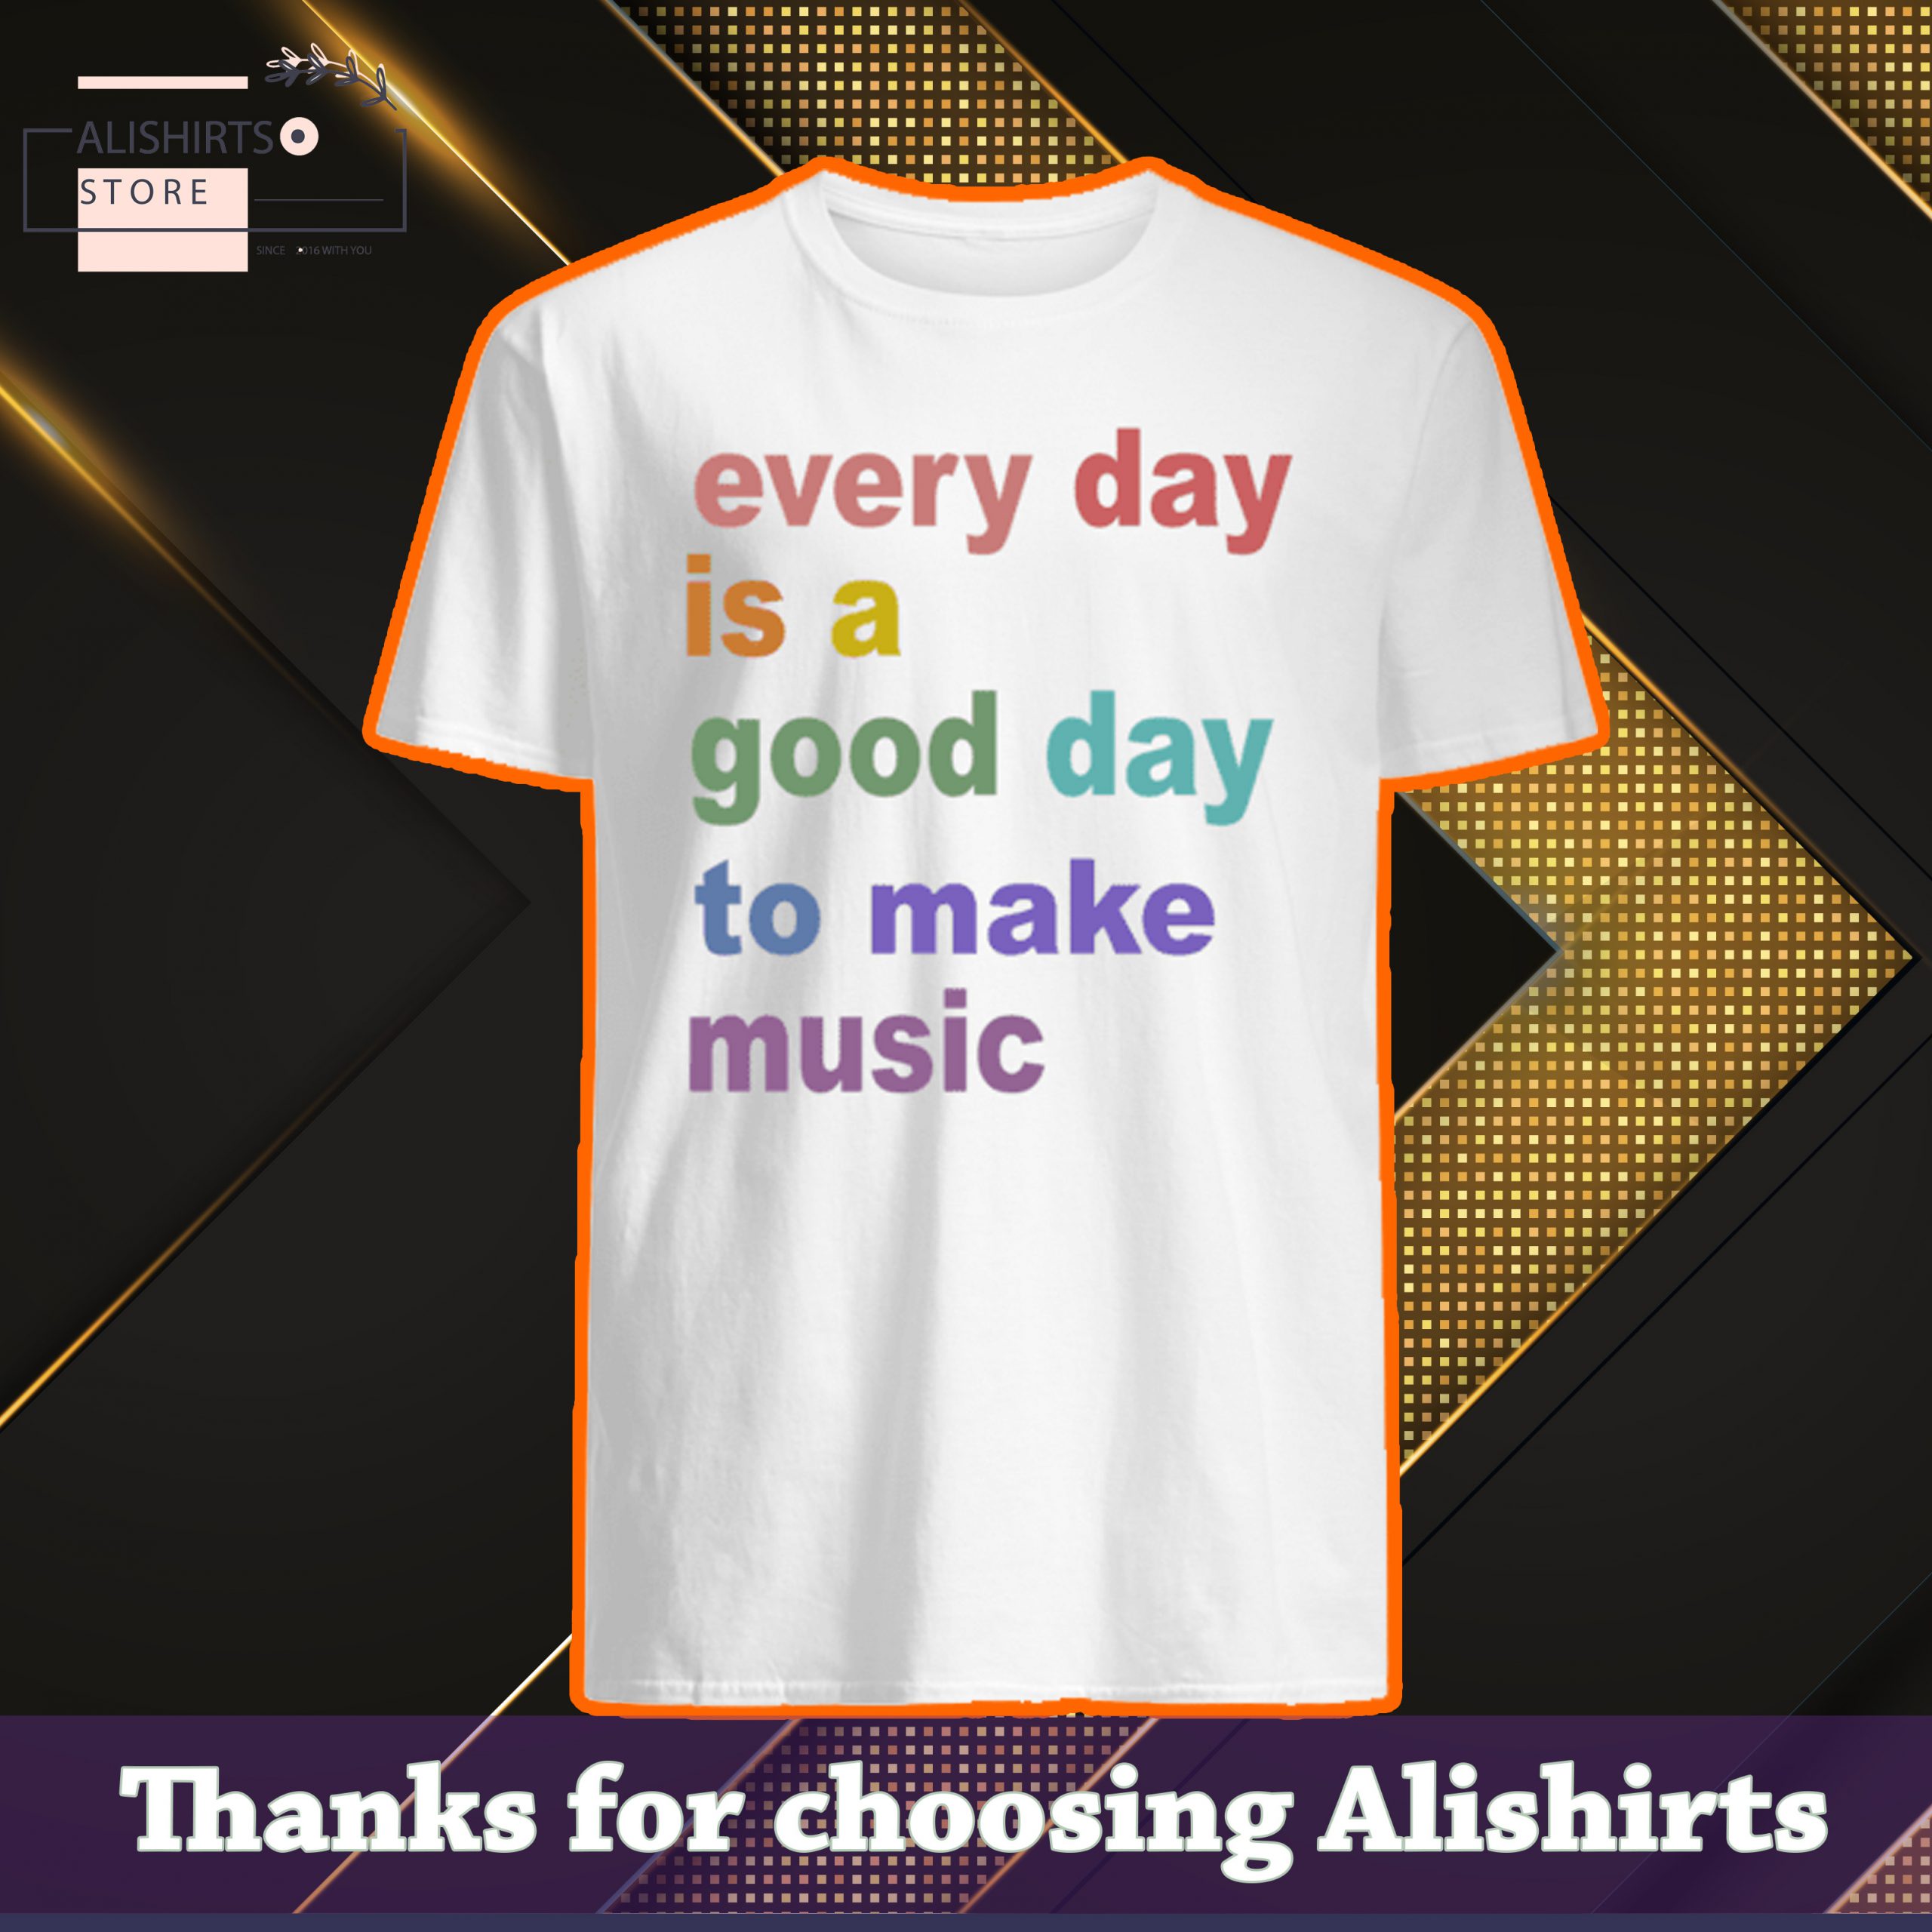 Every day is a good day to make music shirt